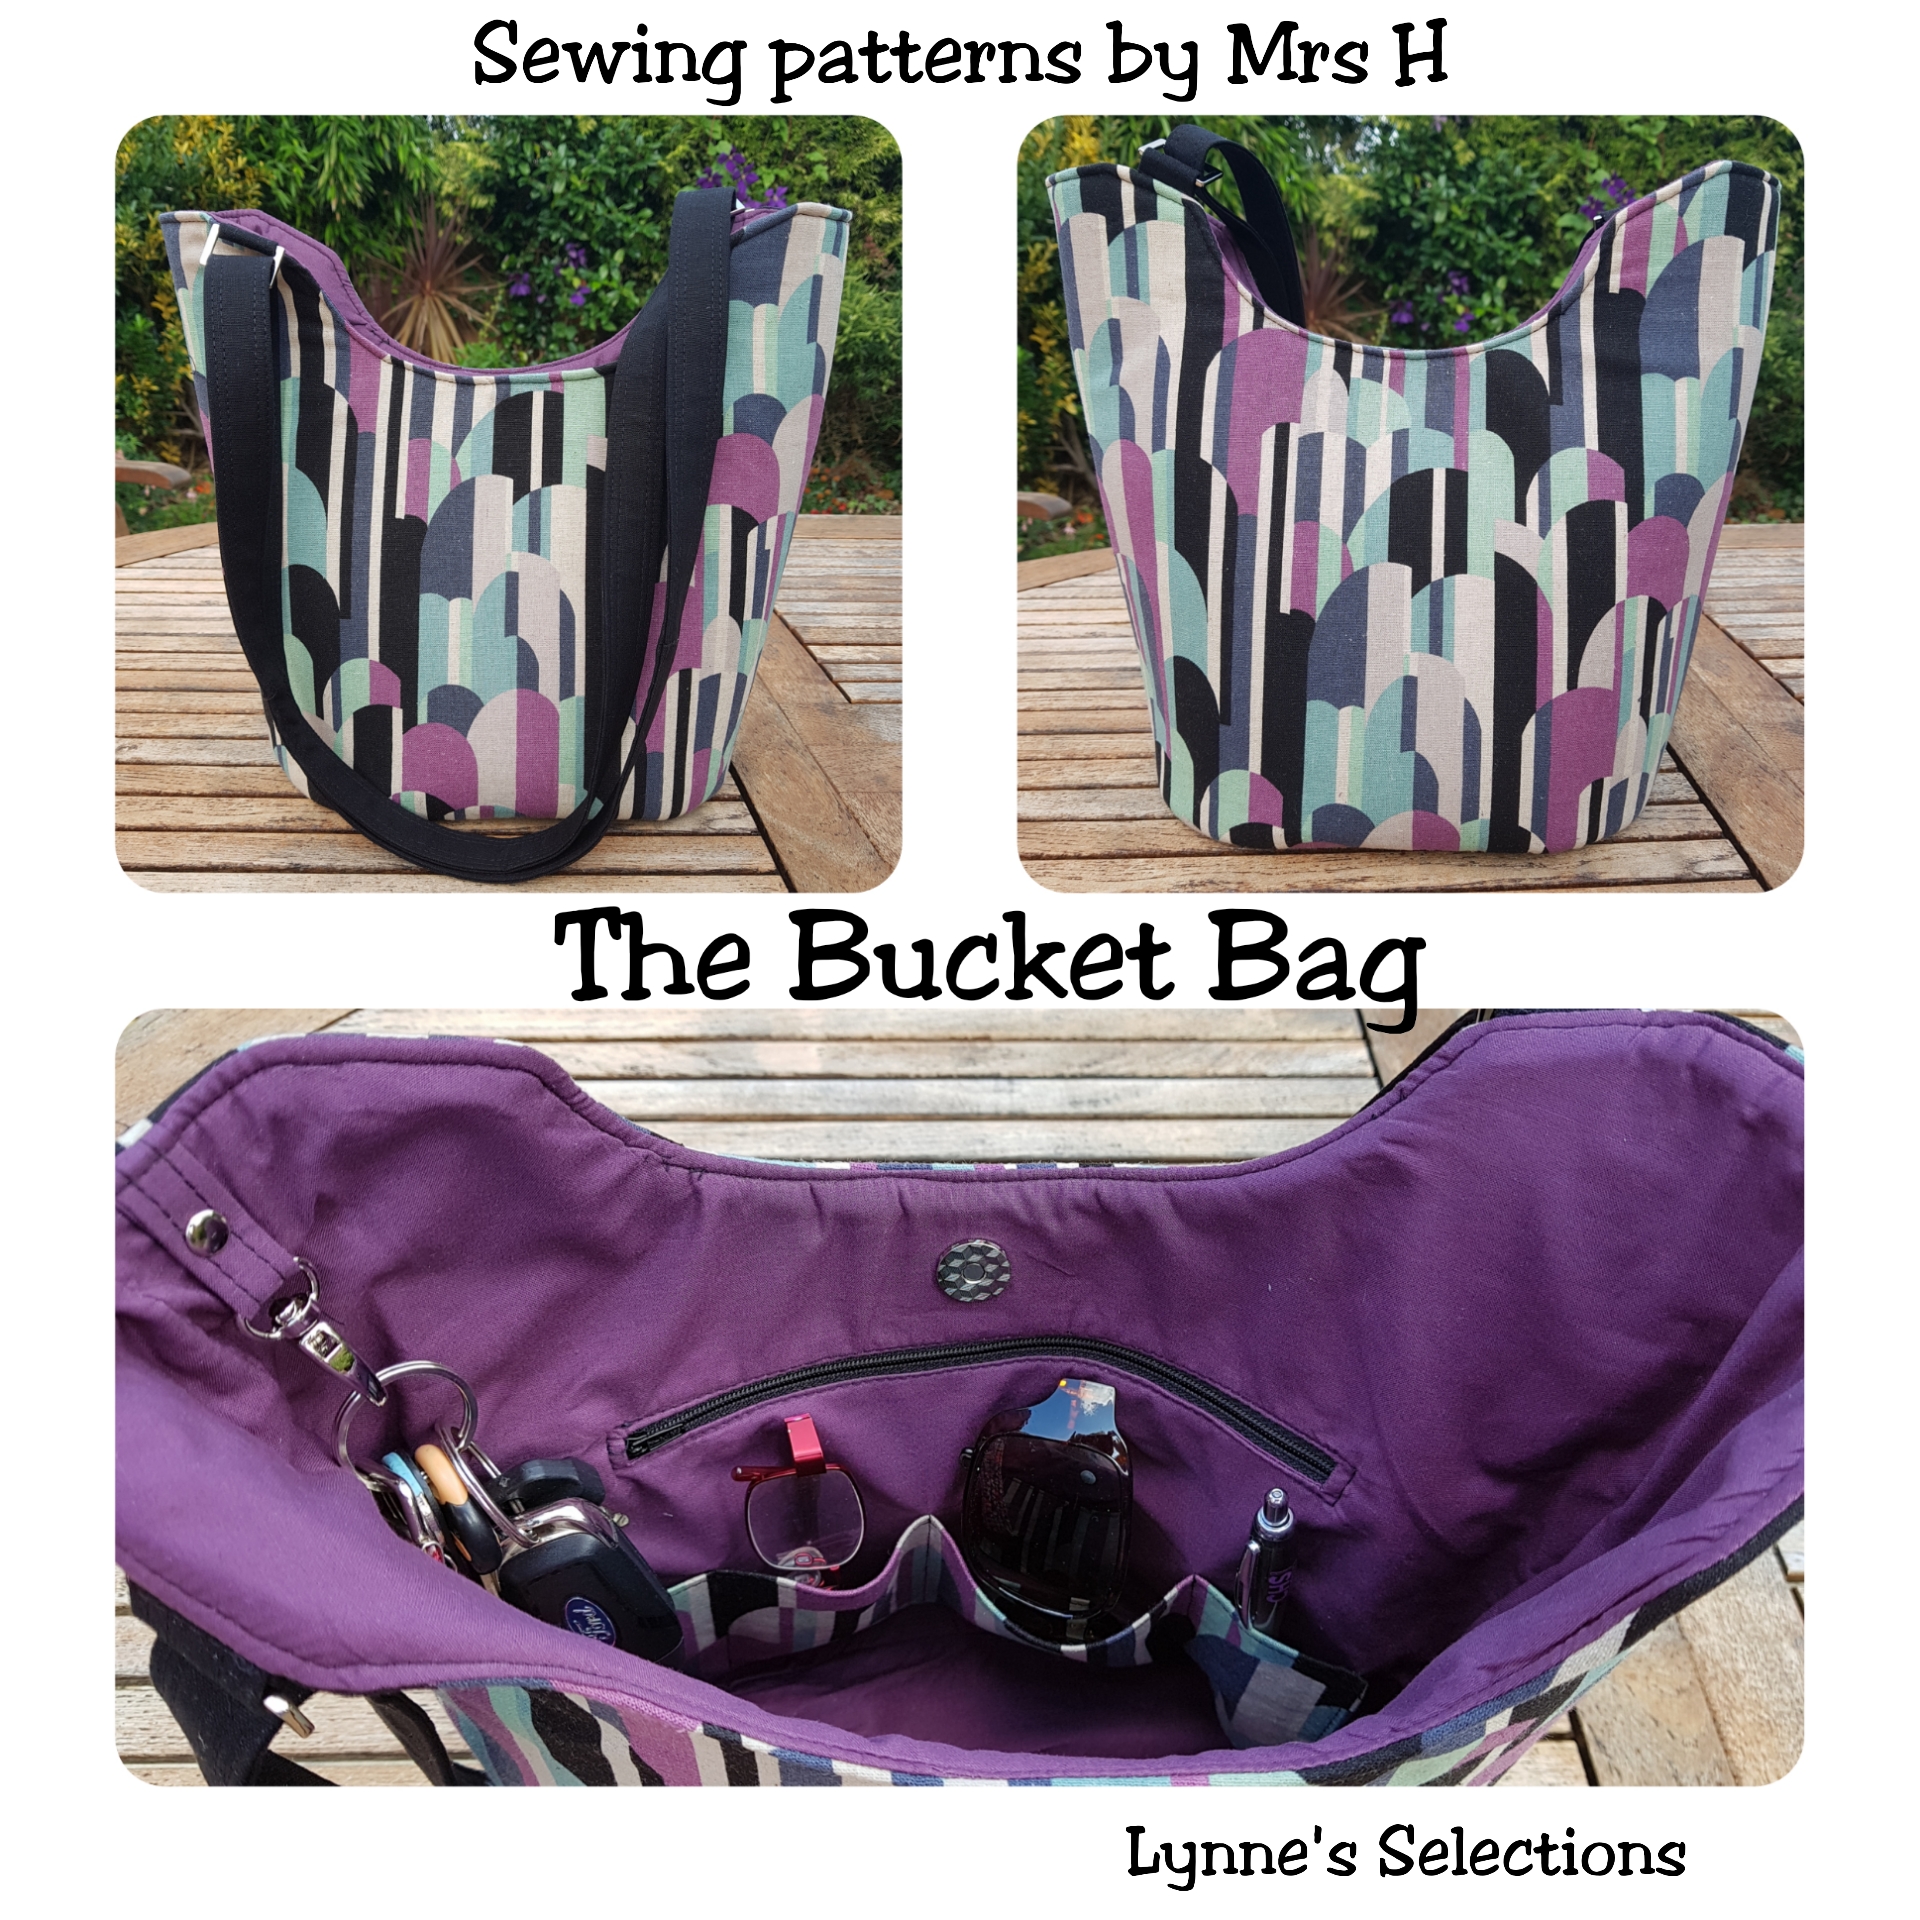 The Bucket Tote, made by Lynne's Selections